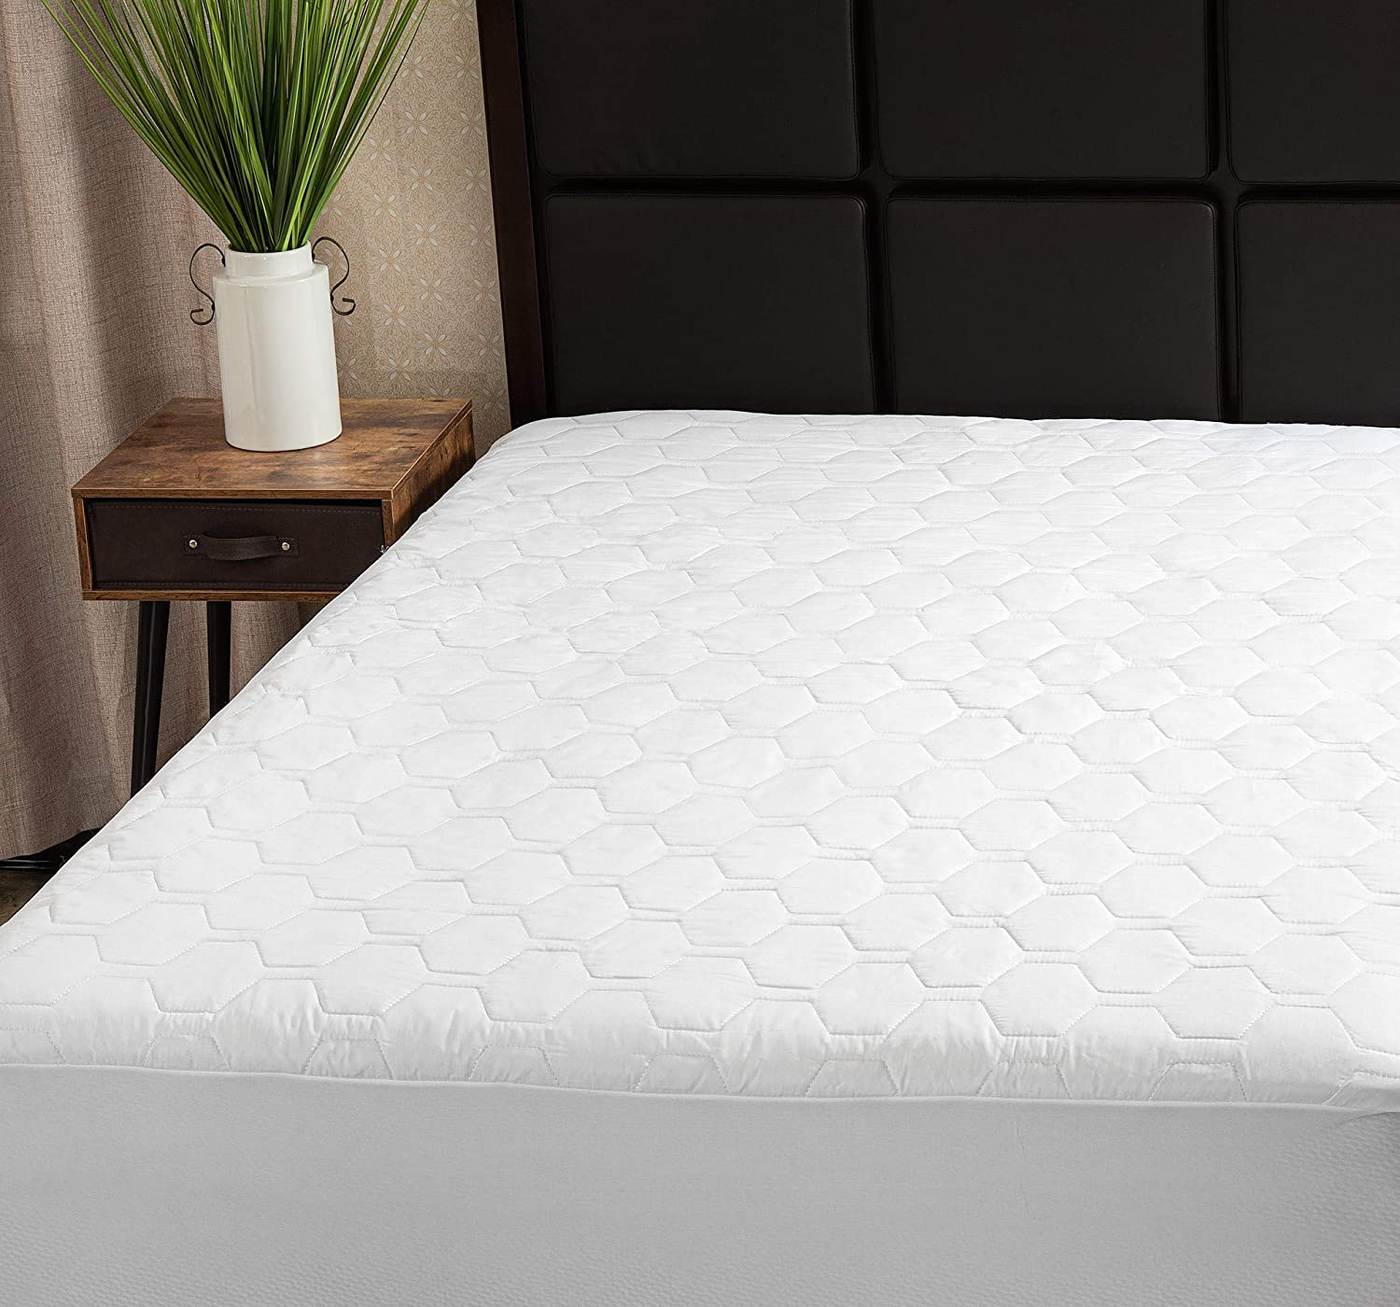 The Grand Mattress Pad Cover - Fitted Deep Pockets, Only Quality Fabrics Used & Breathable - Suitable for Cot (33"x75")